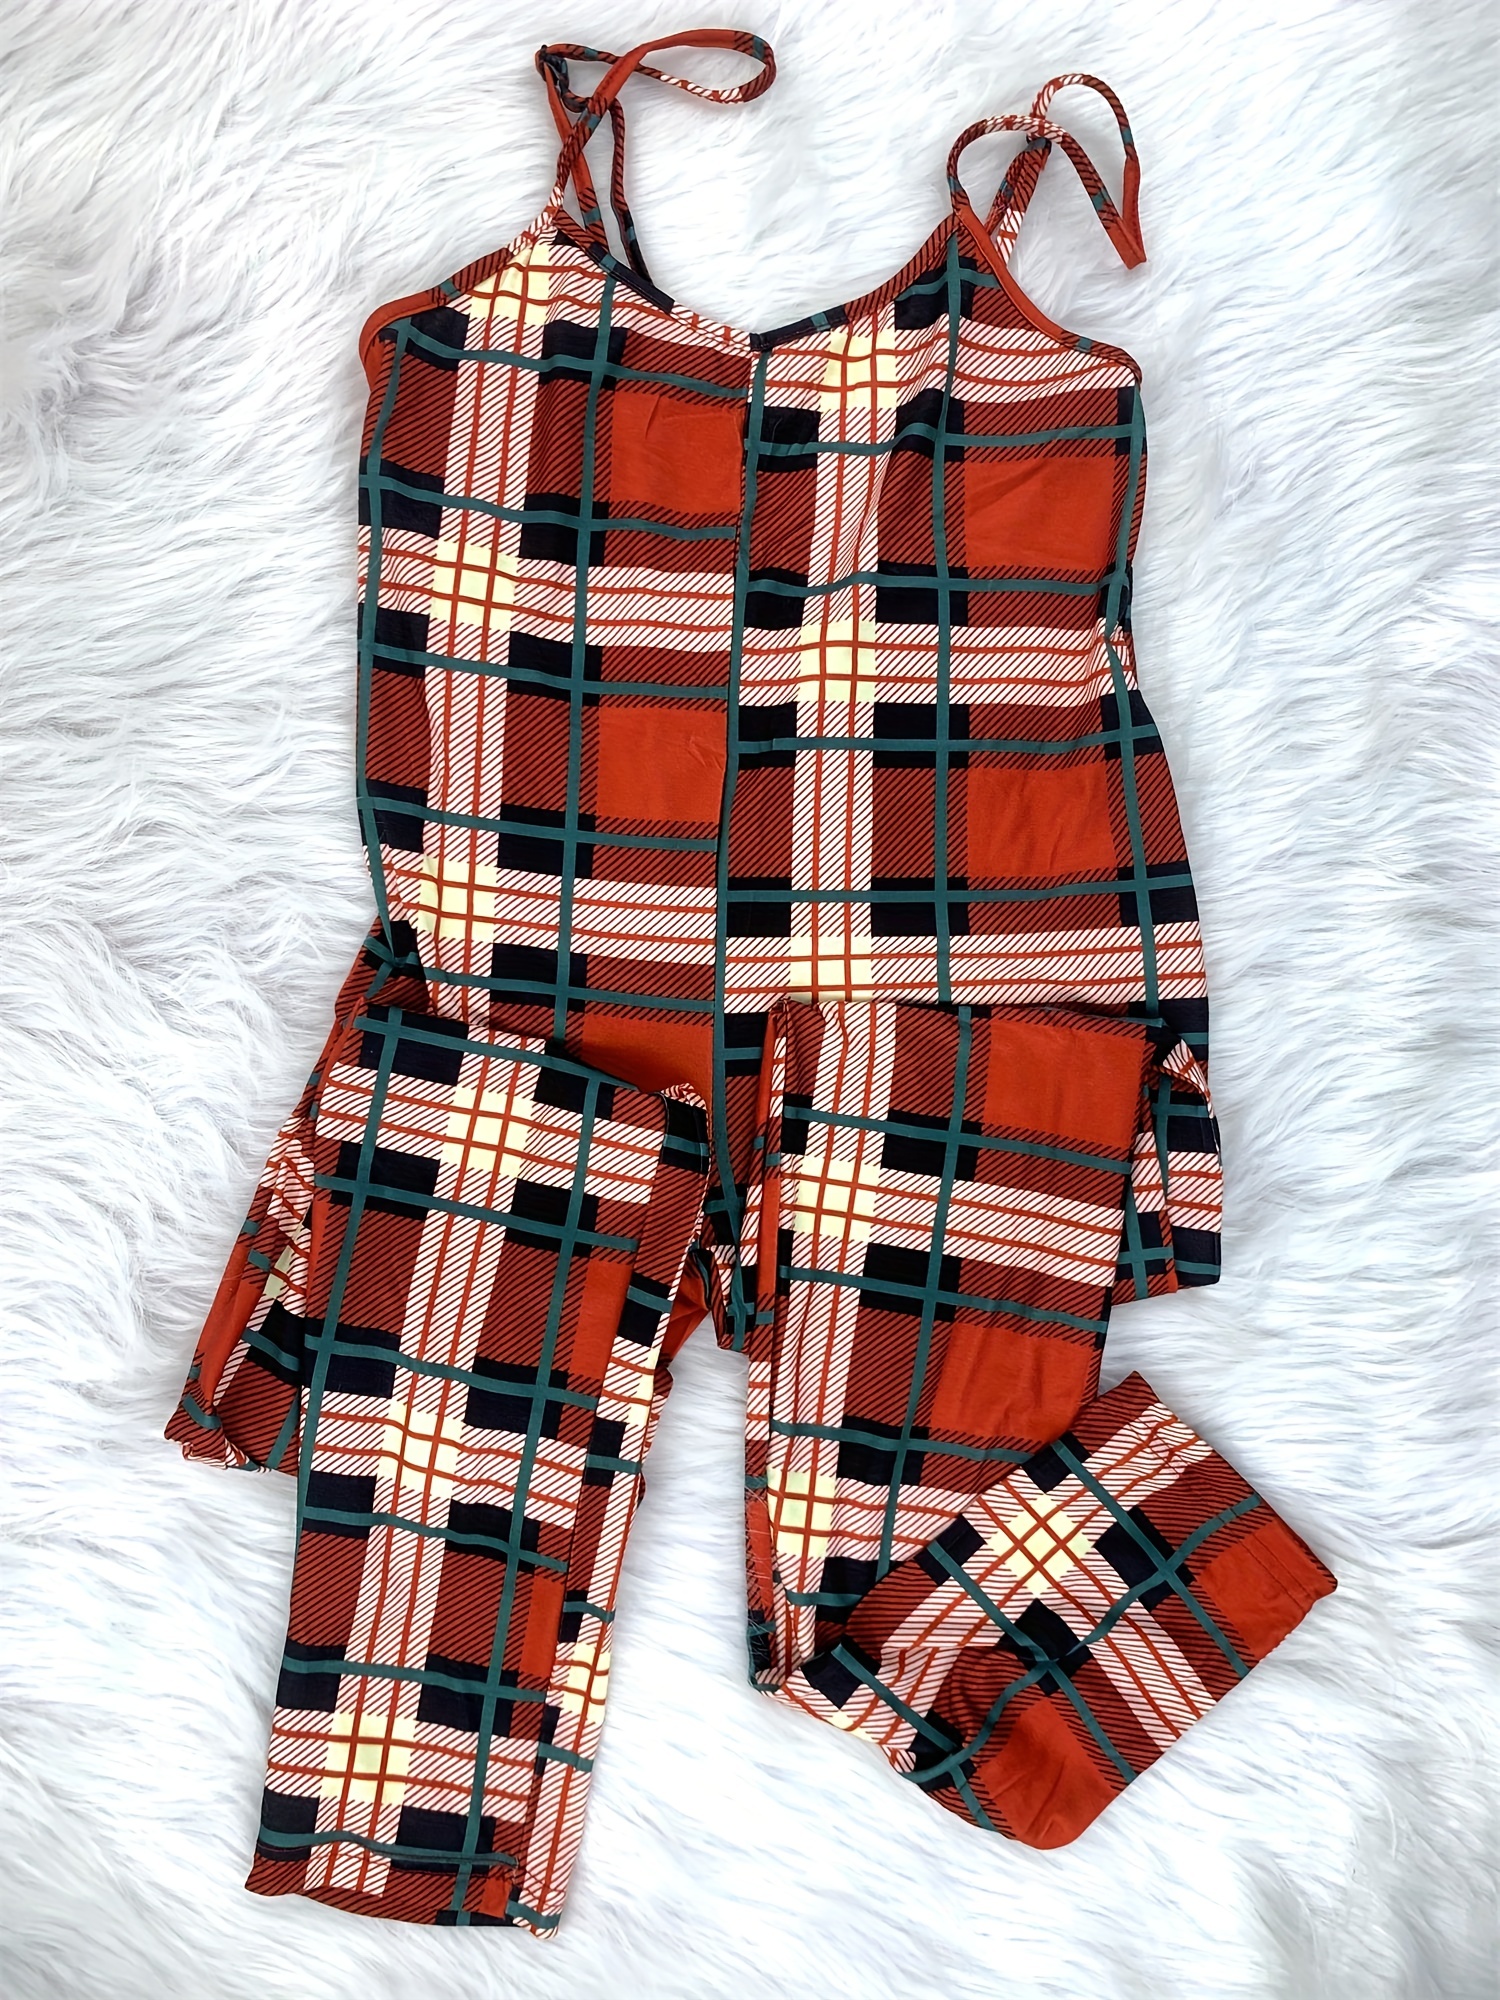 Plaid Print Bodycon Jumpsuit Women Turtleneck Long Sleeve Peplum One Piece  Overalls Skinny Party Casual Romper Catsuit Sashes, Women Jumpsuit, Ladies  Jumpsuits, जंपसूट - Jungle Earth, Vizag